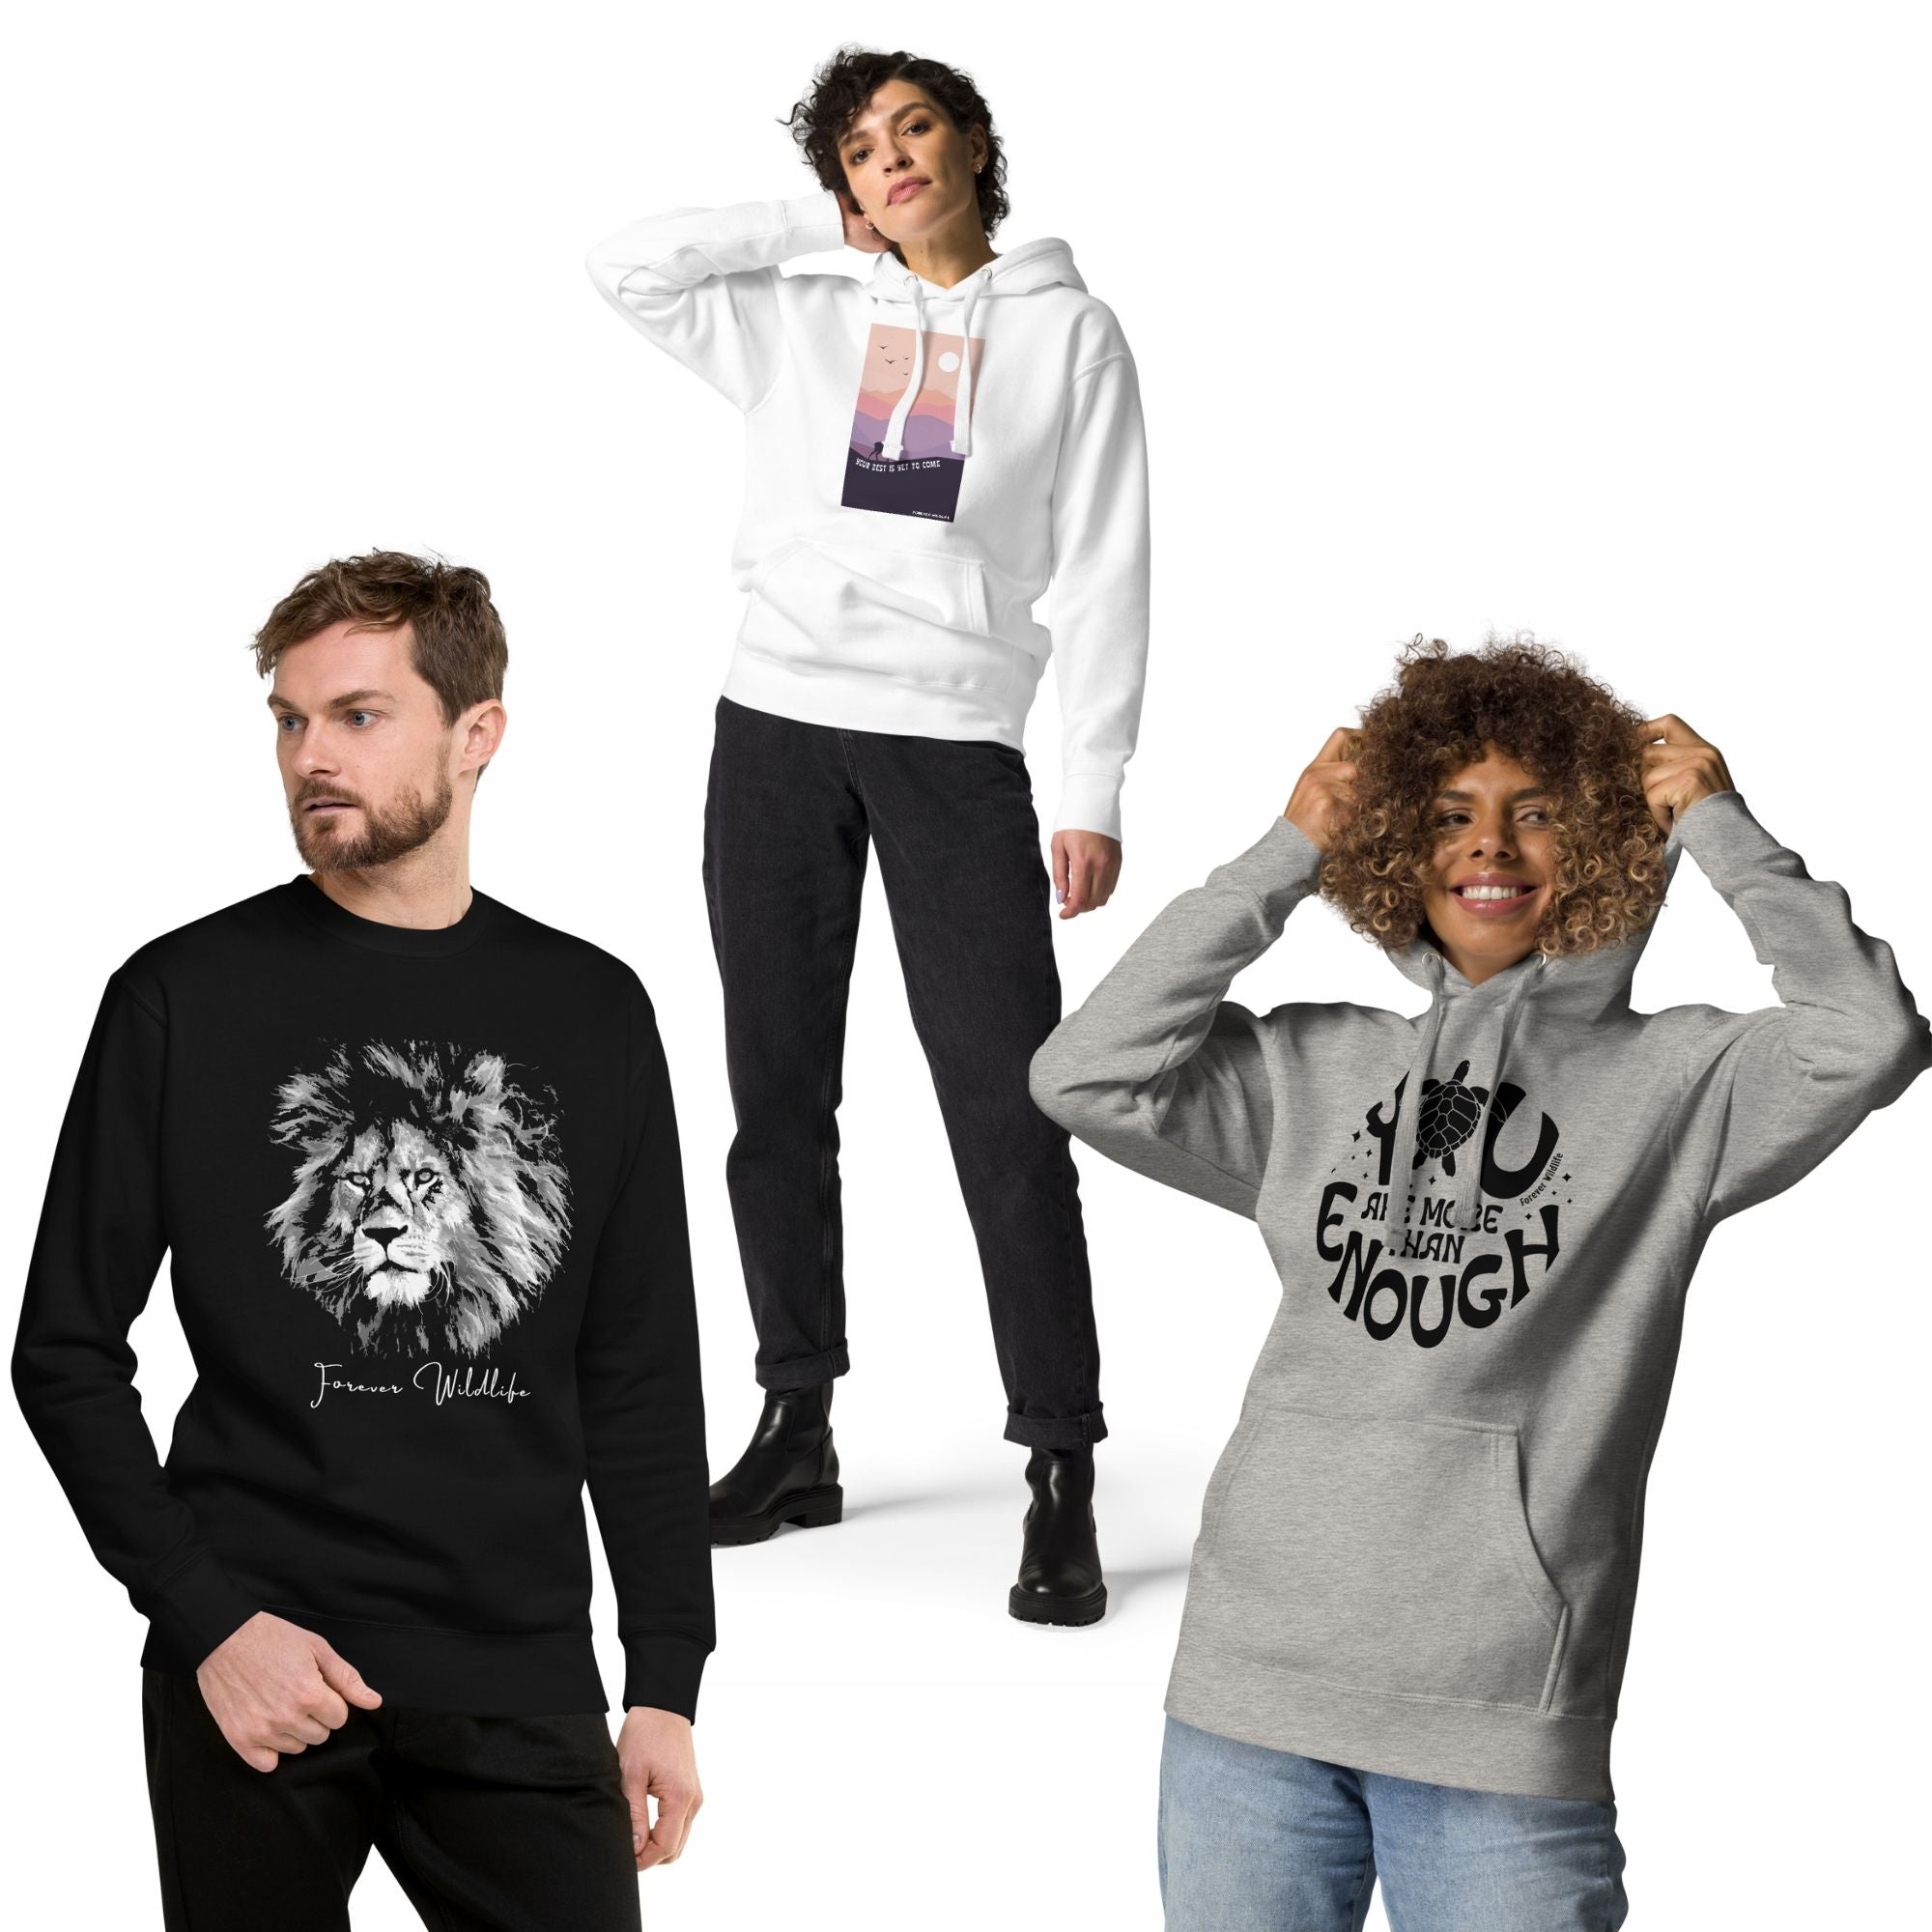 Inspirational Hoodies, Sweatshirts mockups, Best inspirational Hoodies & Inspiration Hoodies with Animal Graphics as part of Wildlife Clothing & Apparel from Forever Wildlife.